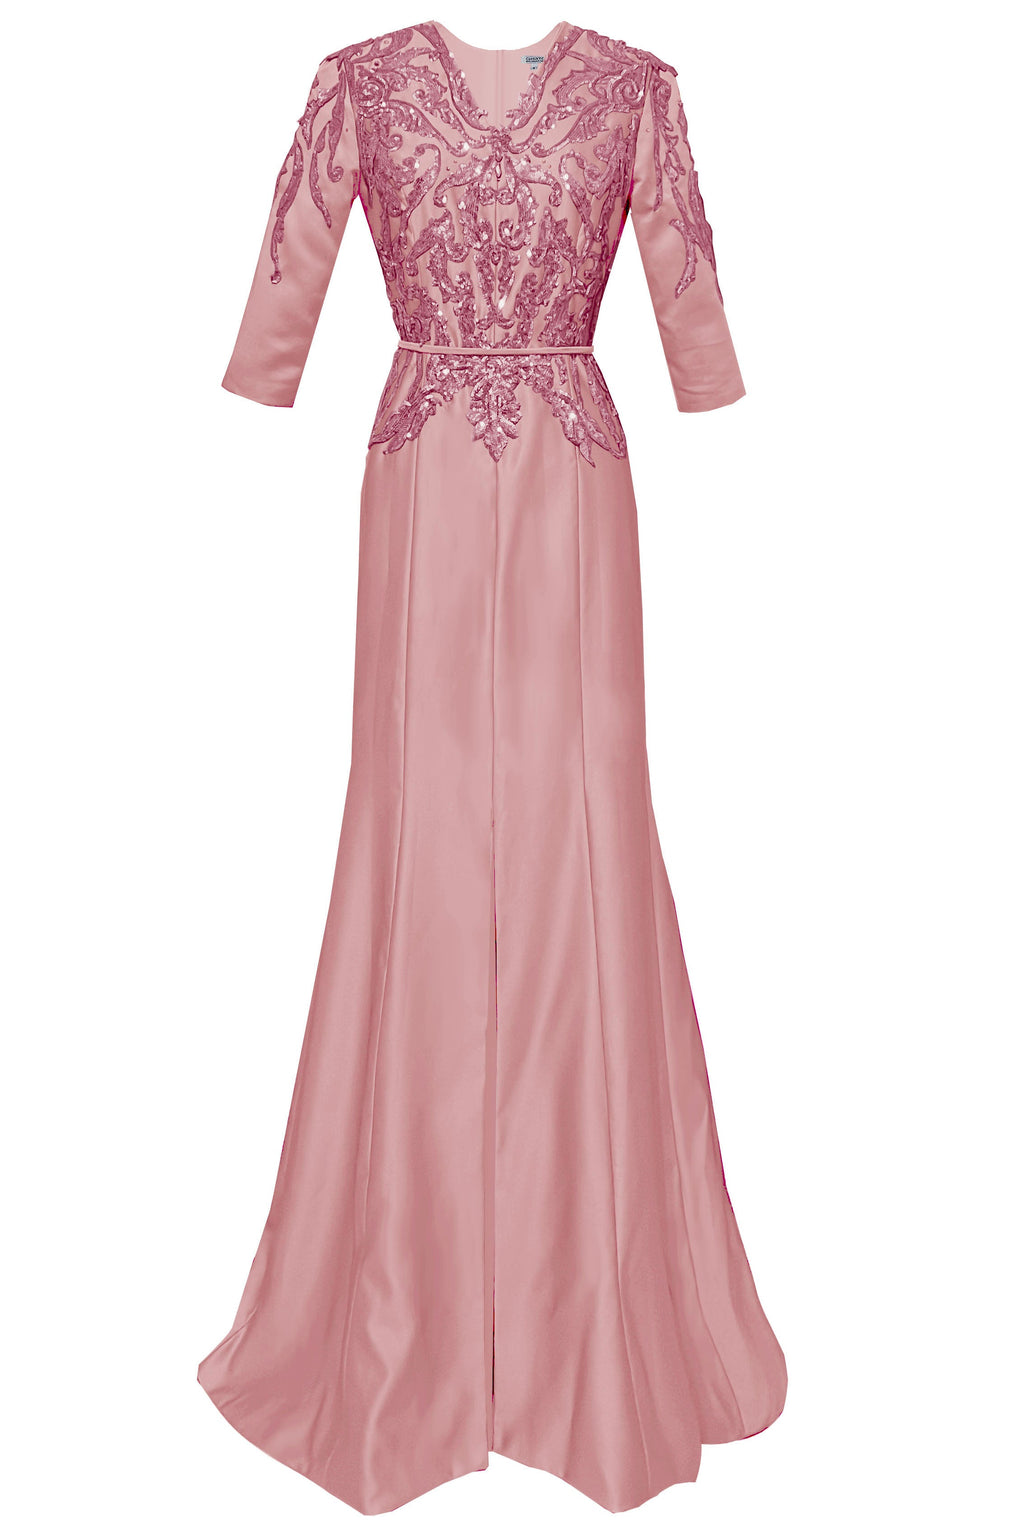 Mandalay Formal Evening Gown with Sleeves